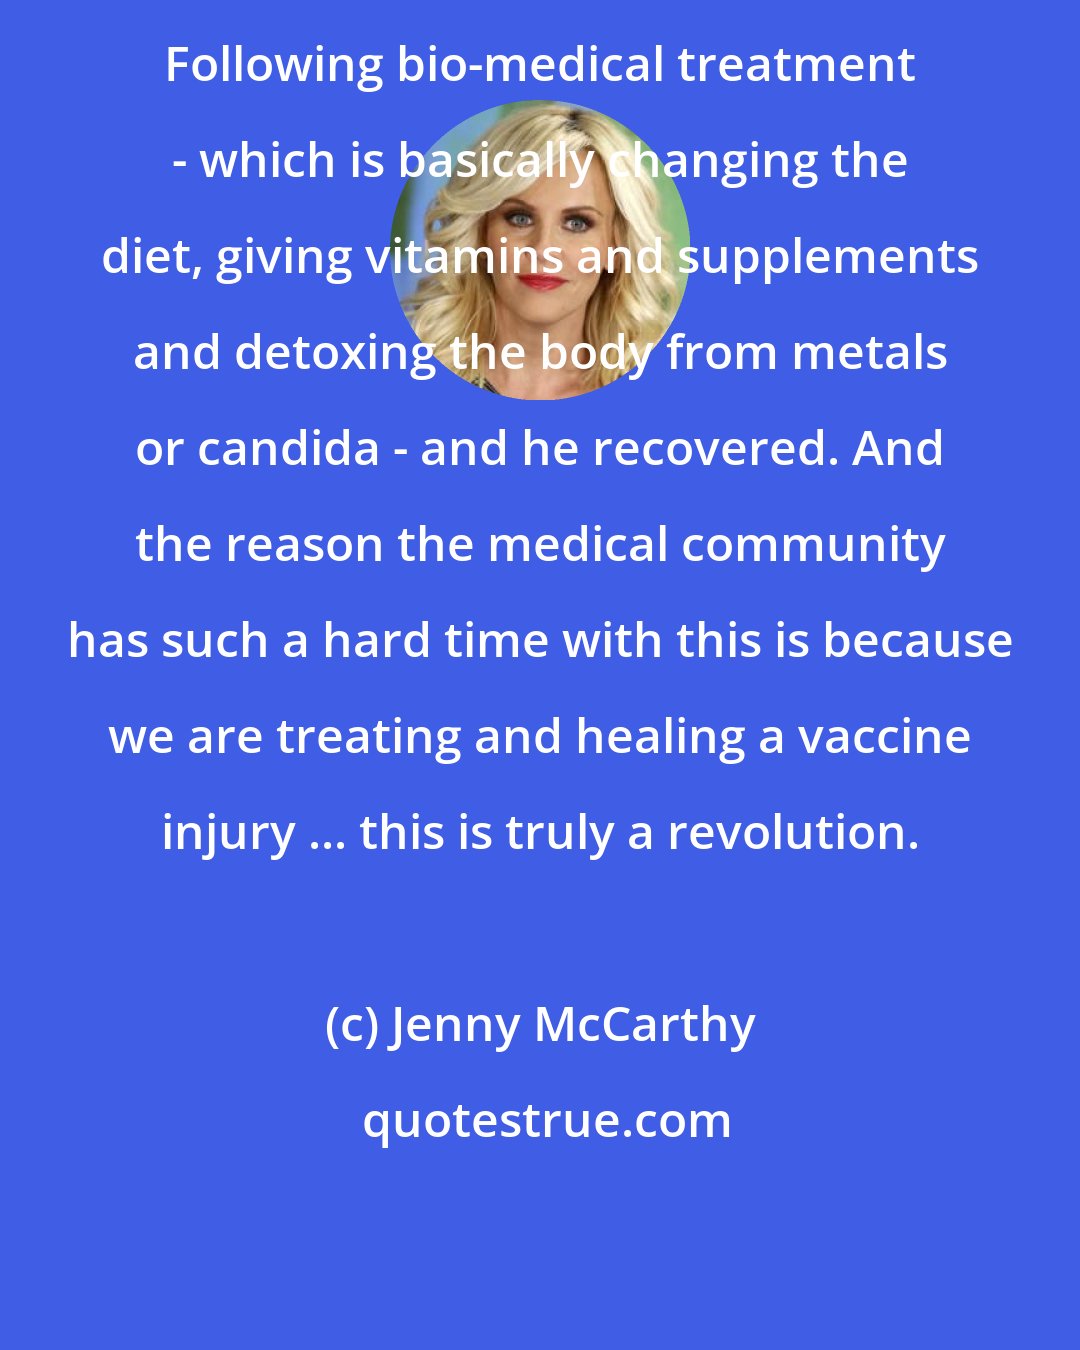 Jenny McCarthy: Following bio-medical treatment - which is basically changing the diet, giving vitamins and supplements and detoxing the body from metals or candida - and he recovered. And the reason the medical community has such a hard time with this is because we are treating and healing a vaccine injury ... this is truly a revolution.